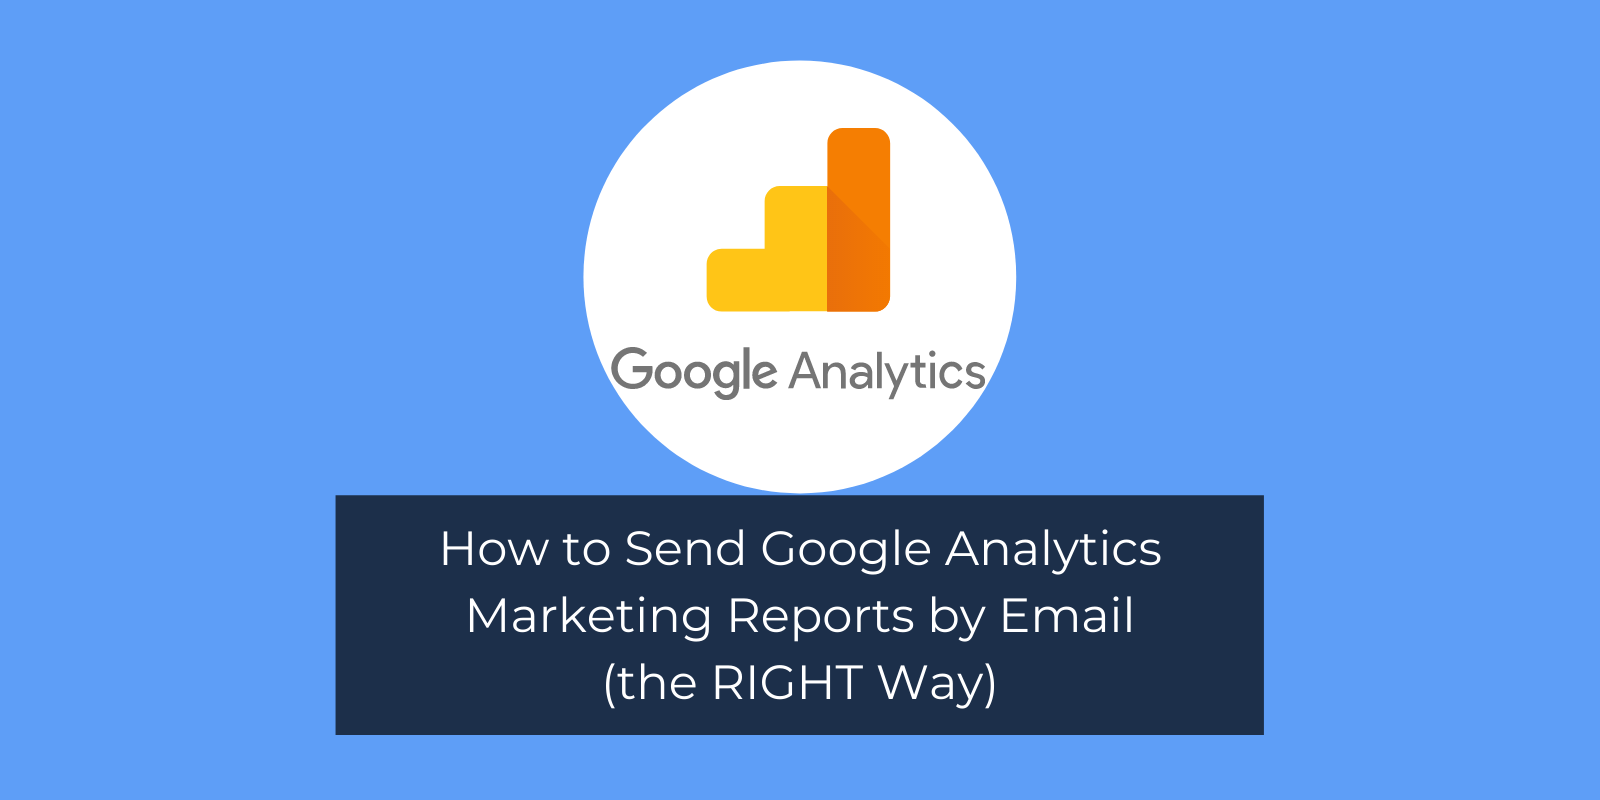 How to Send Google Analytics Marketing Reports by Email (the RIGHT Way)